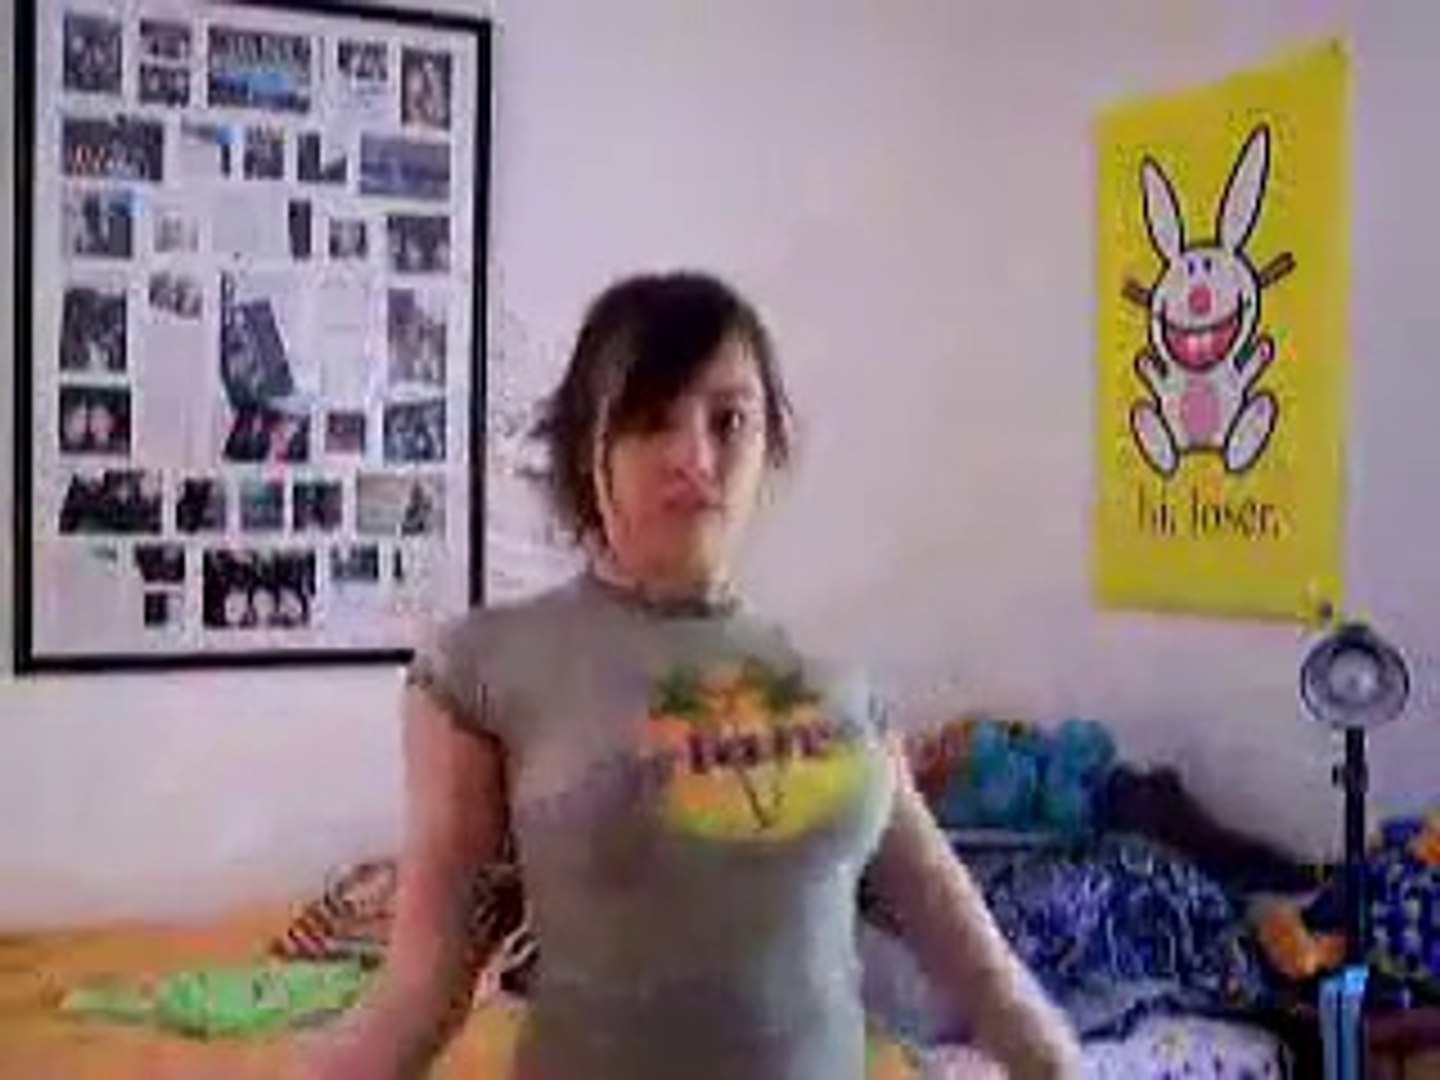 Busty Teen Webcam Dance - Hot XXX Photos, Best Sex Images and Free Porn  Pics on www.askmeporn.com